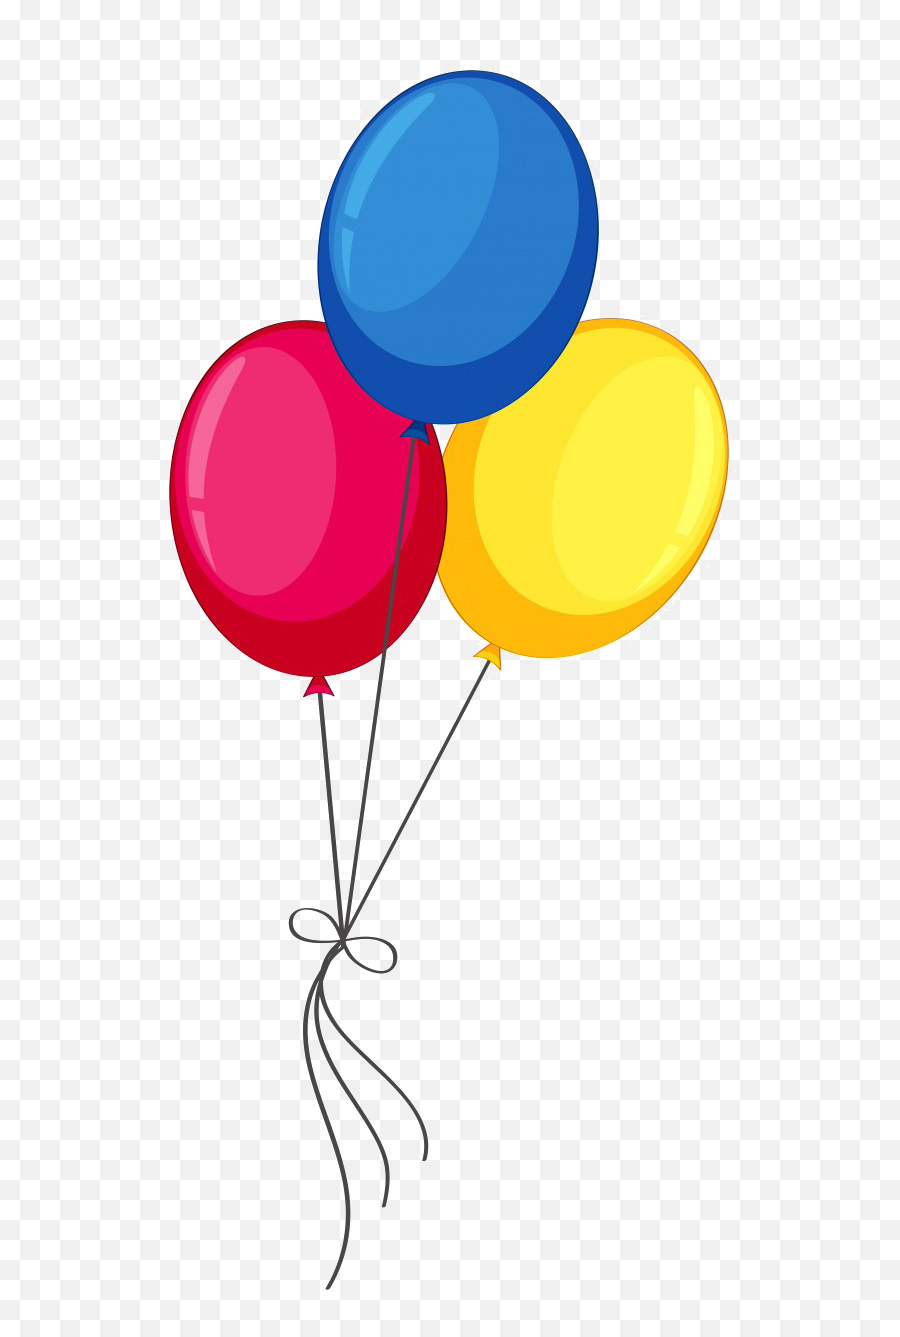 Download Hd Balloon Png Photo Background - Balloons White Balloon White Background Emoji,Balloon Emoji Png